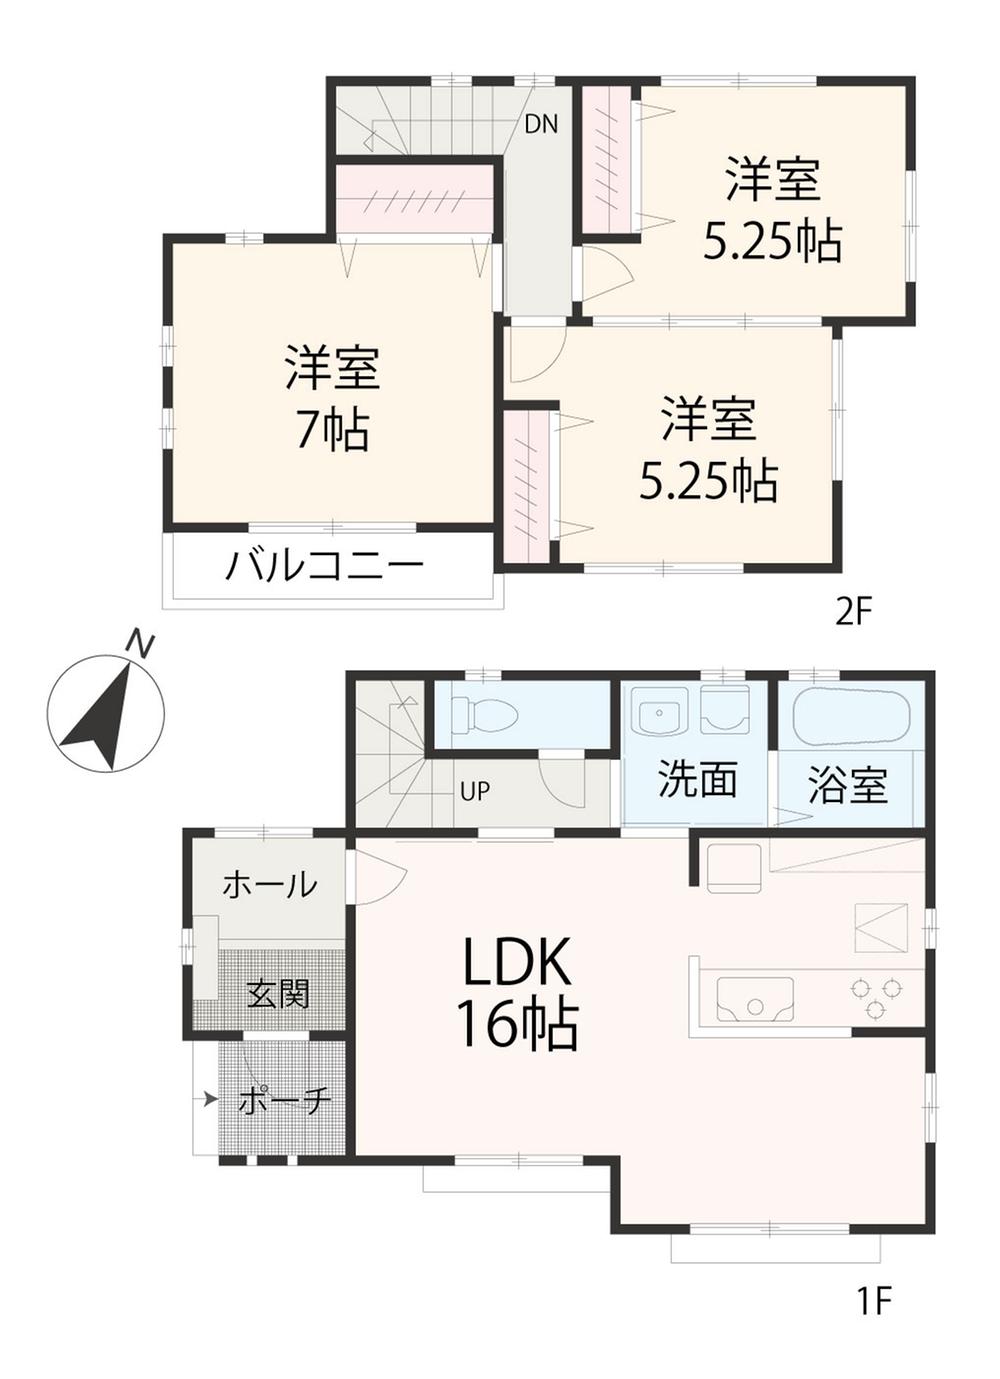 Other building plan example. Building plan example (No. 2 locations) Building Price      12.6 million yen, Building area 79.34 sq m